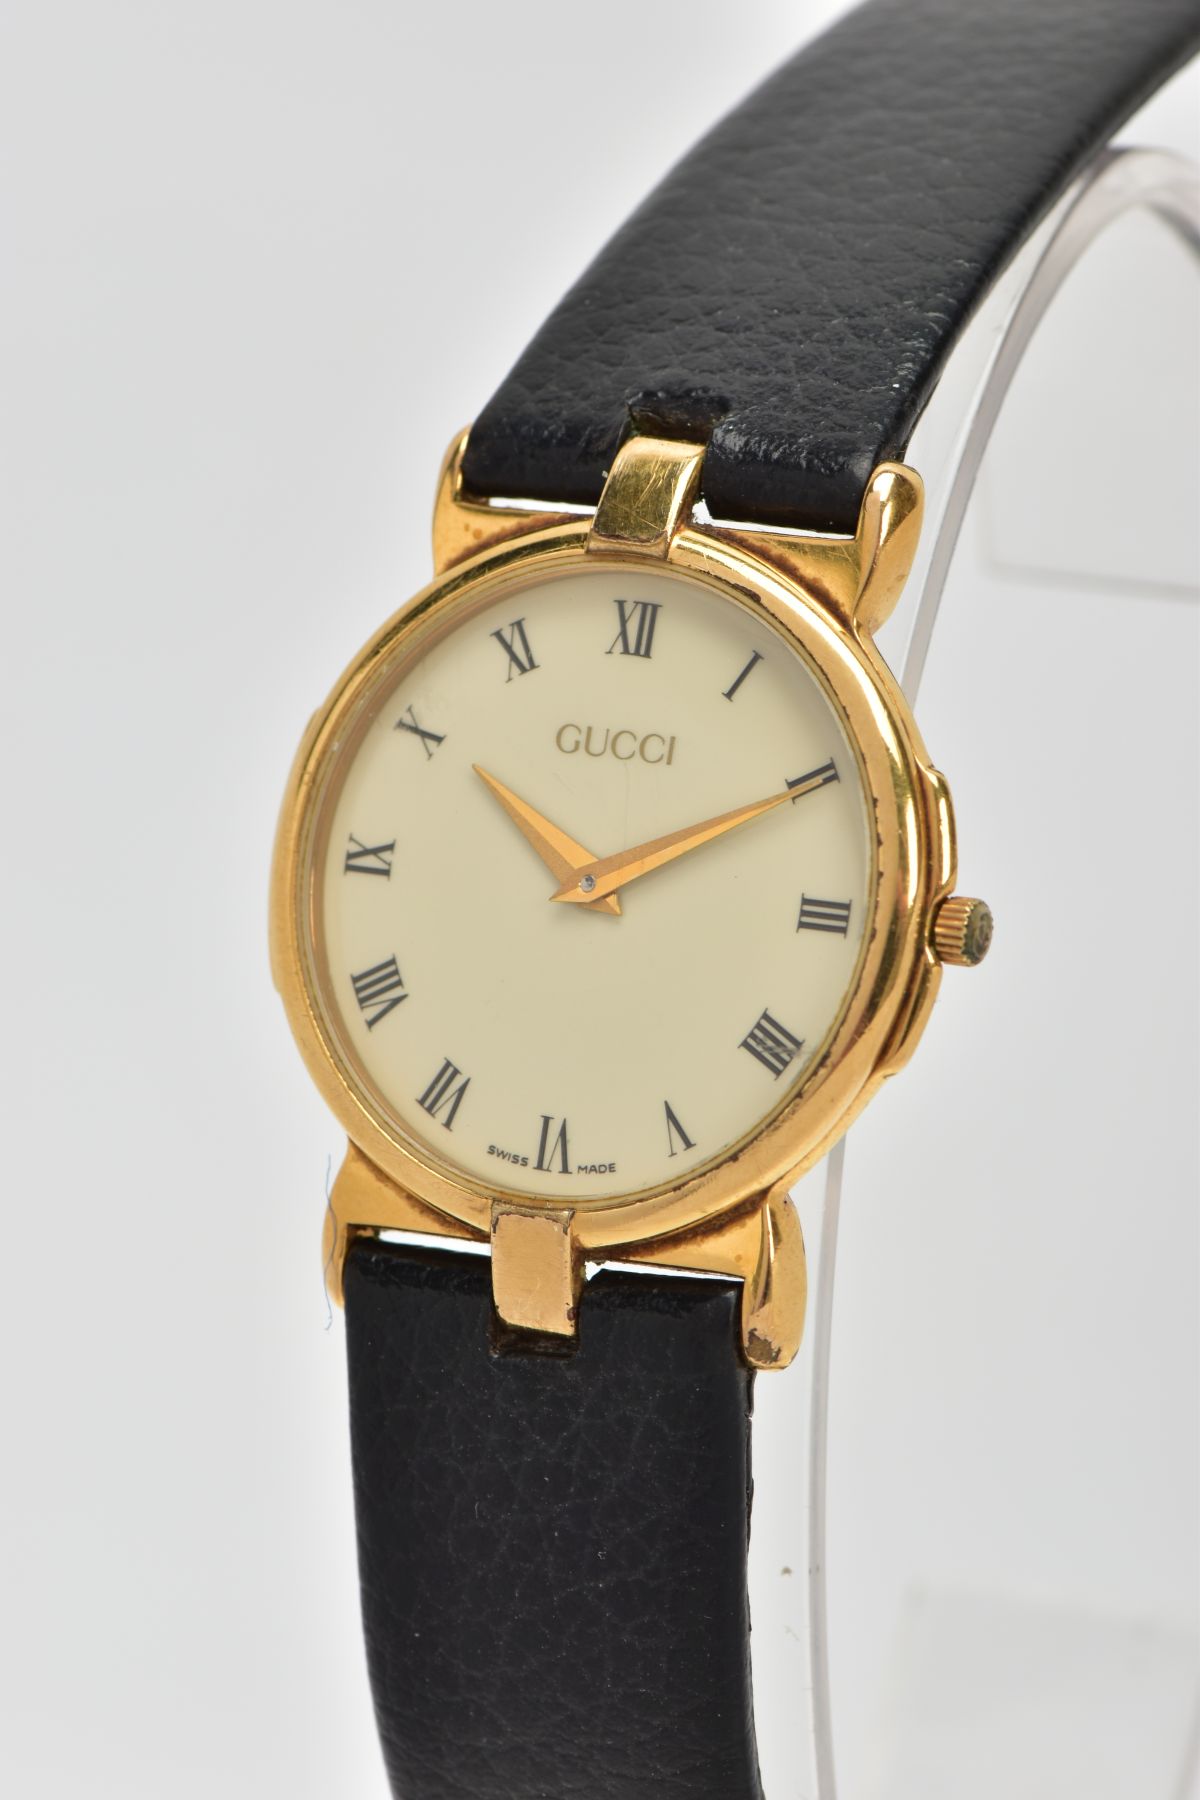 A GENTS 'GUCCI' WRISTWATCH, round cream dial signed 'Gucci', Roman numerals, gold tone hands, within - Image 2 of 5